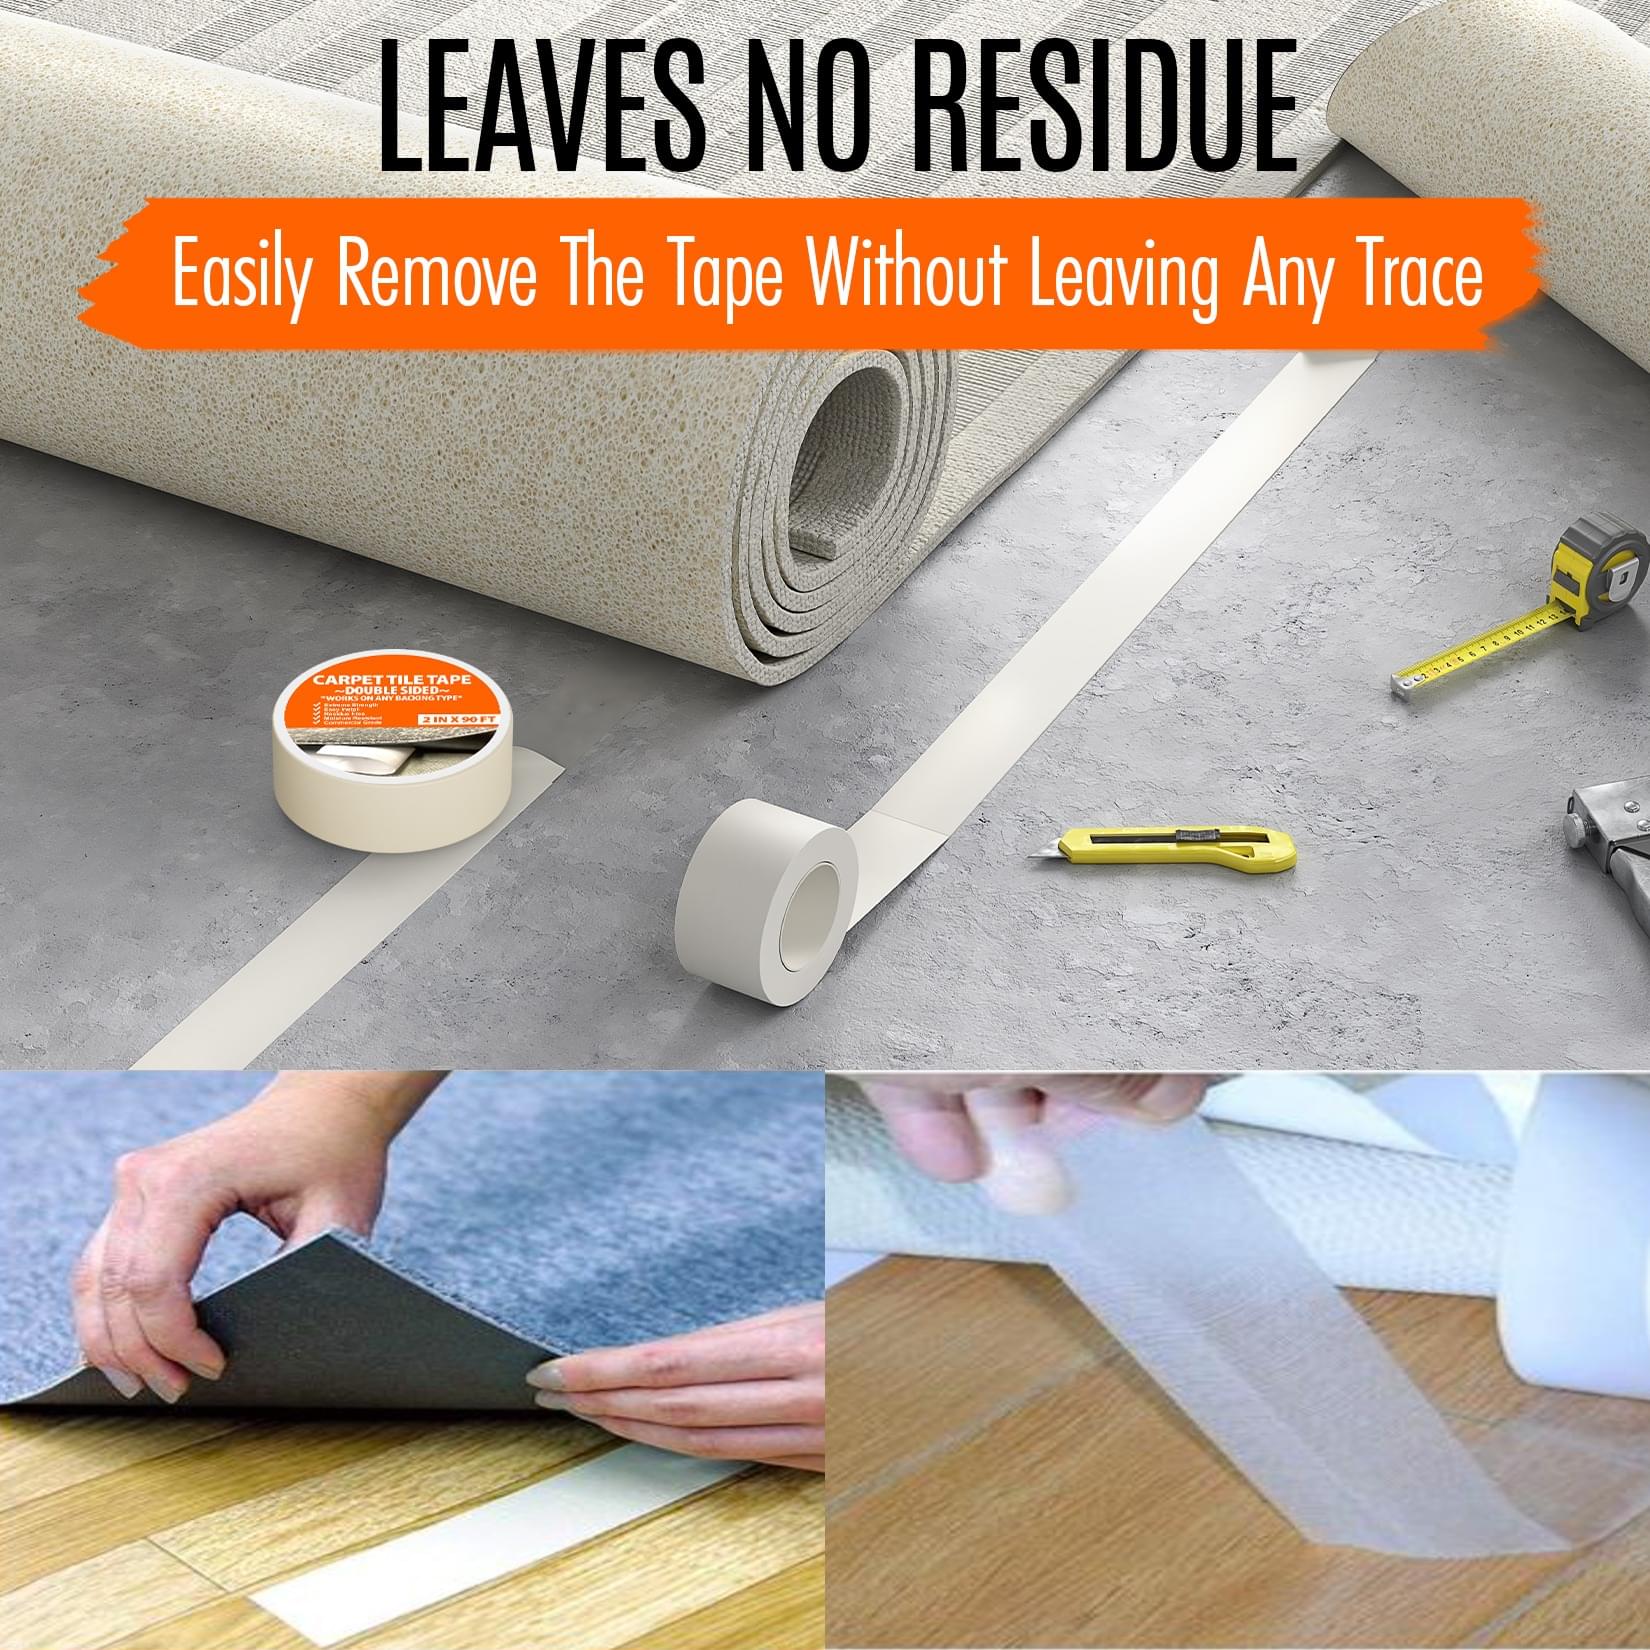 How to use carpet tape: everything you need to know